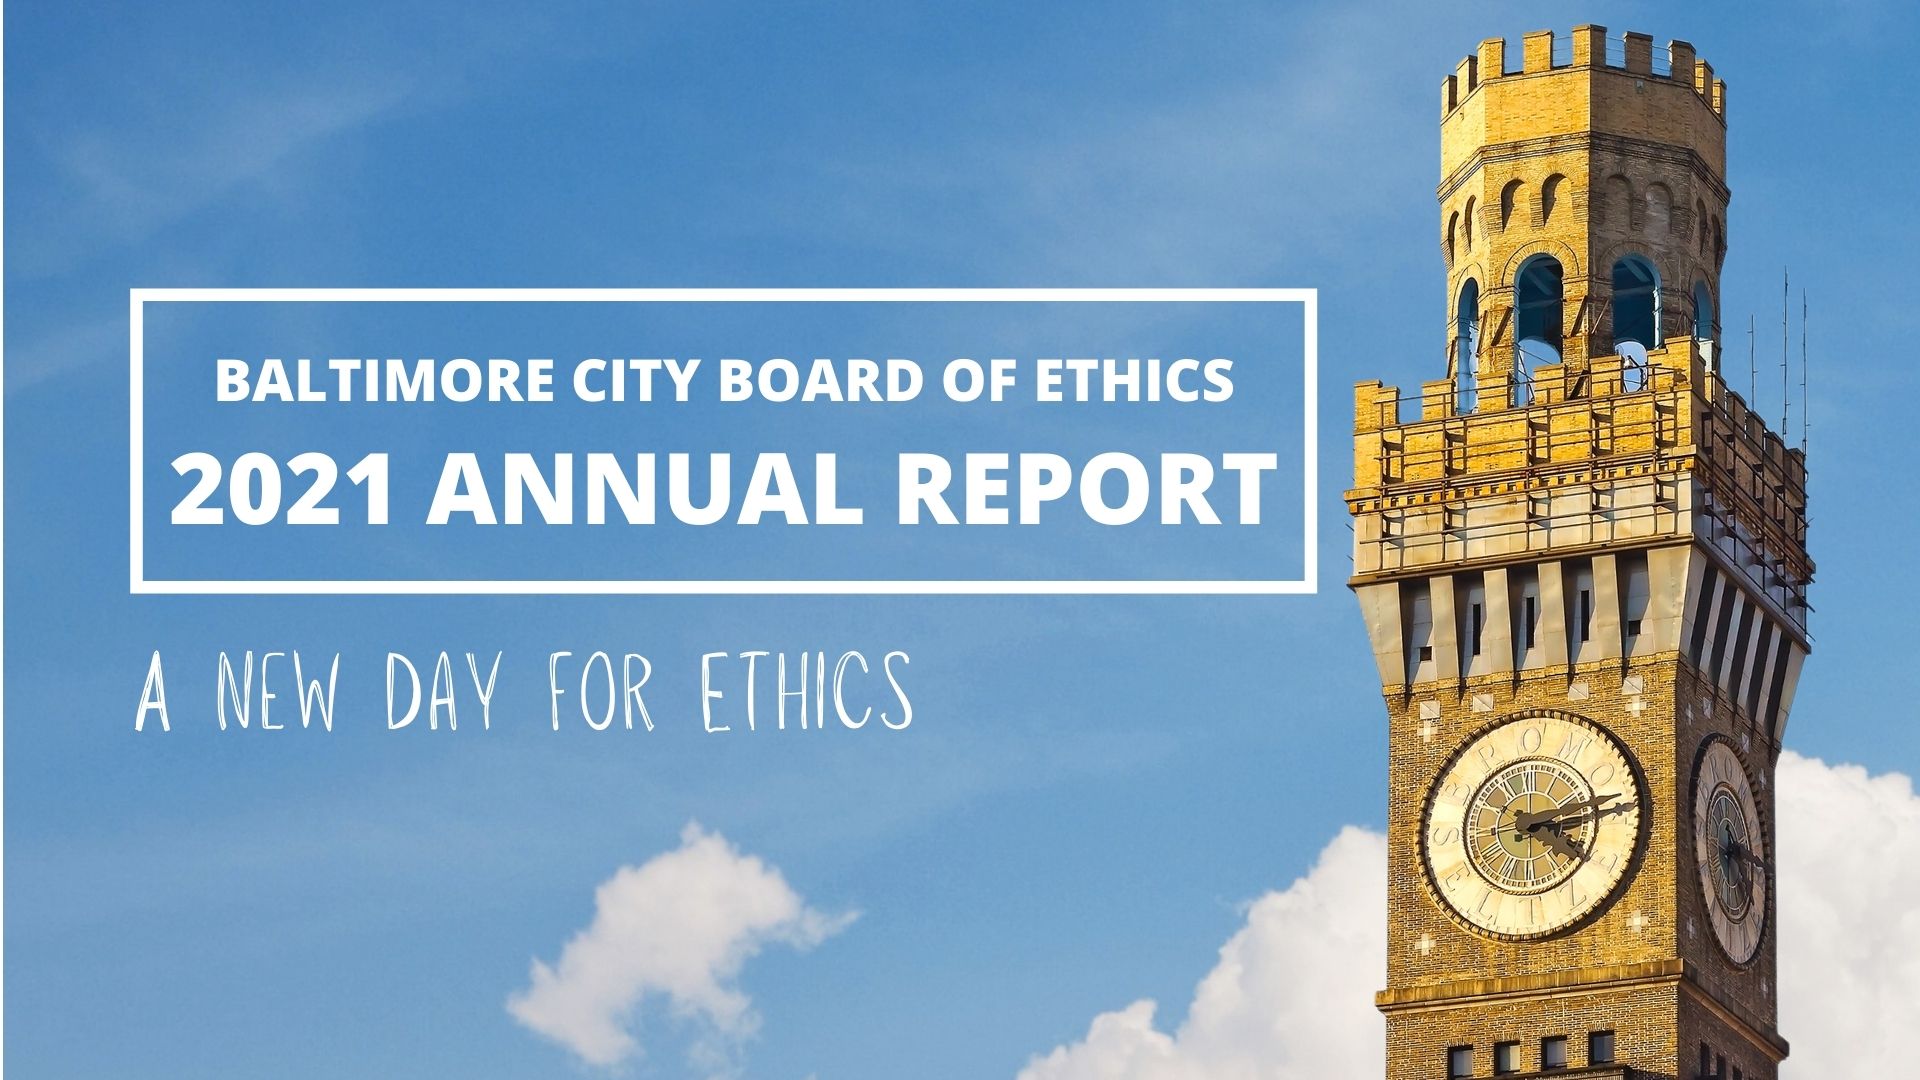 Board of Ethics 2021 Annual Report